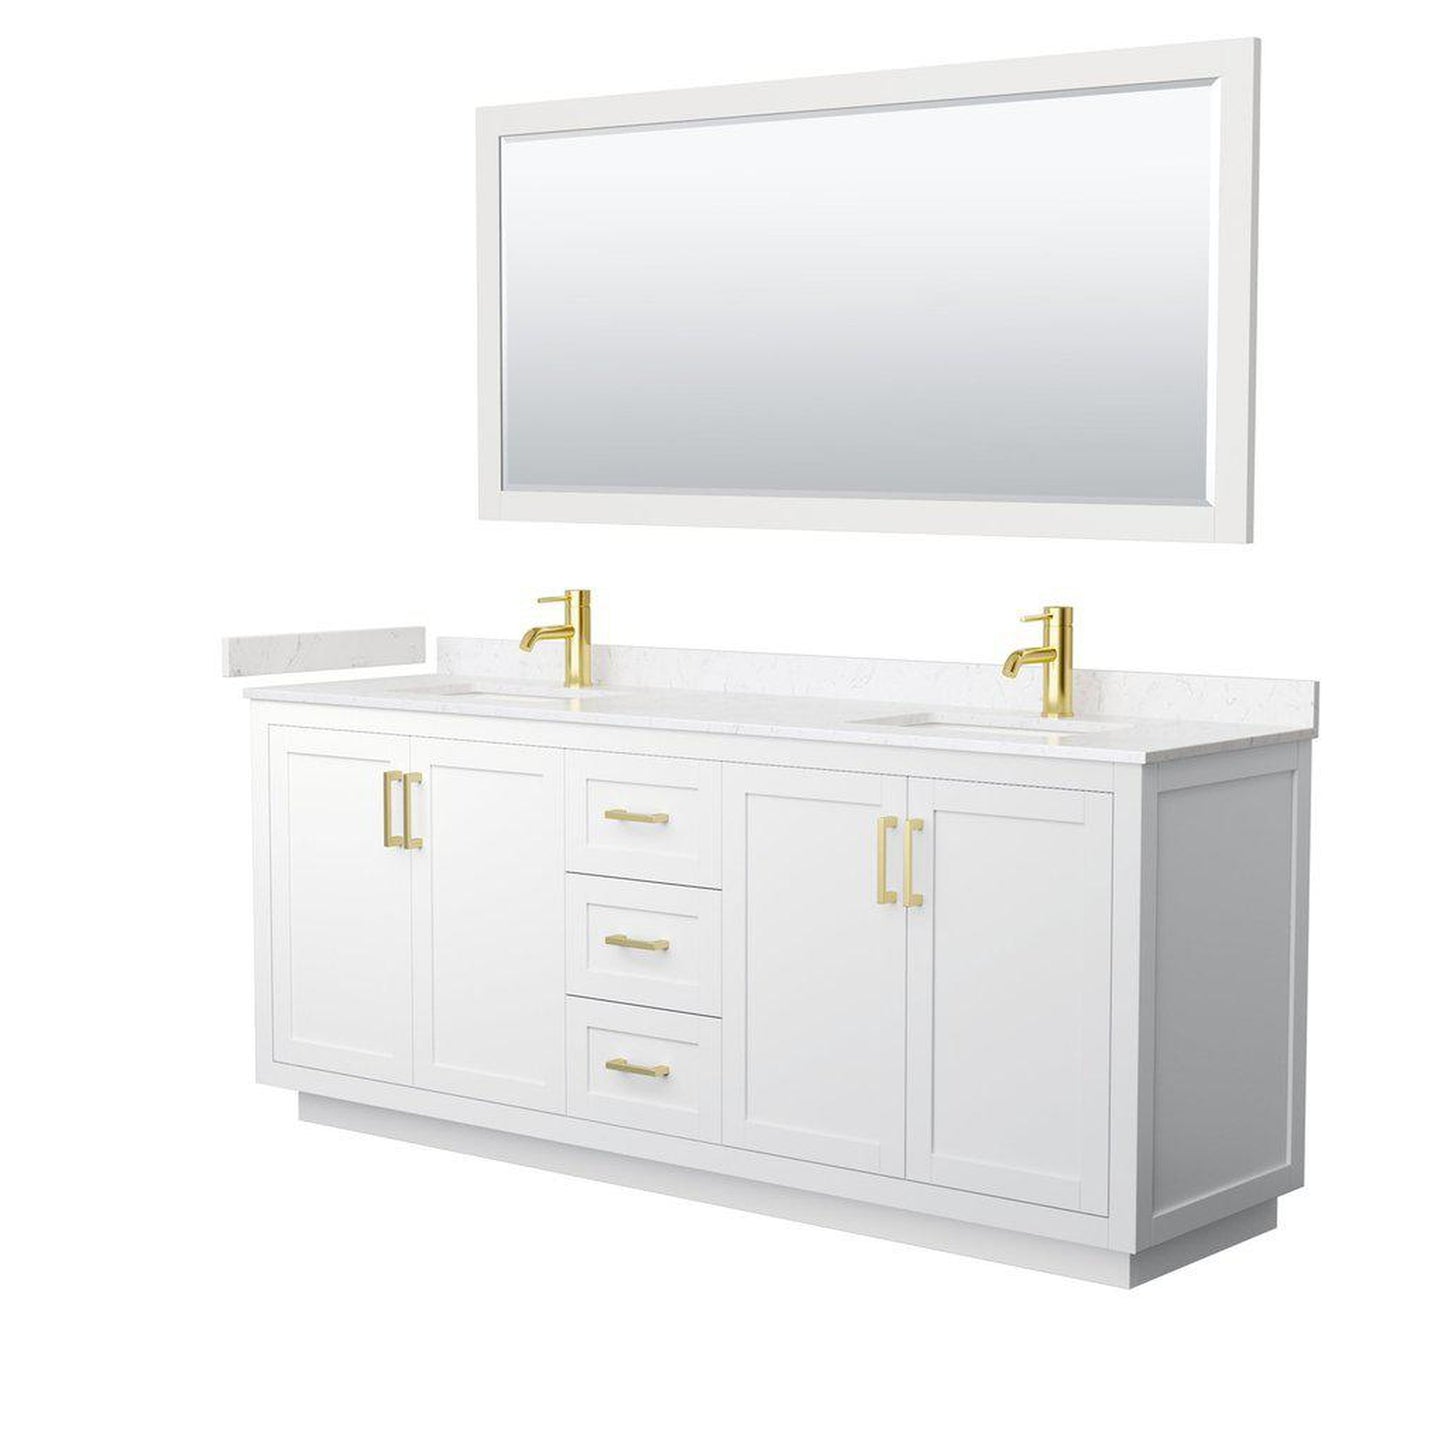 Wyndham Collection Miranda 80" Double Bathroom White Vanity Set With Light-Vein Carrara Cultured Marble Countertop, Undermount Square Sink, 70" Mirror And Brushed Gold Trim